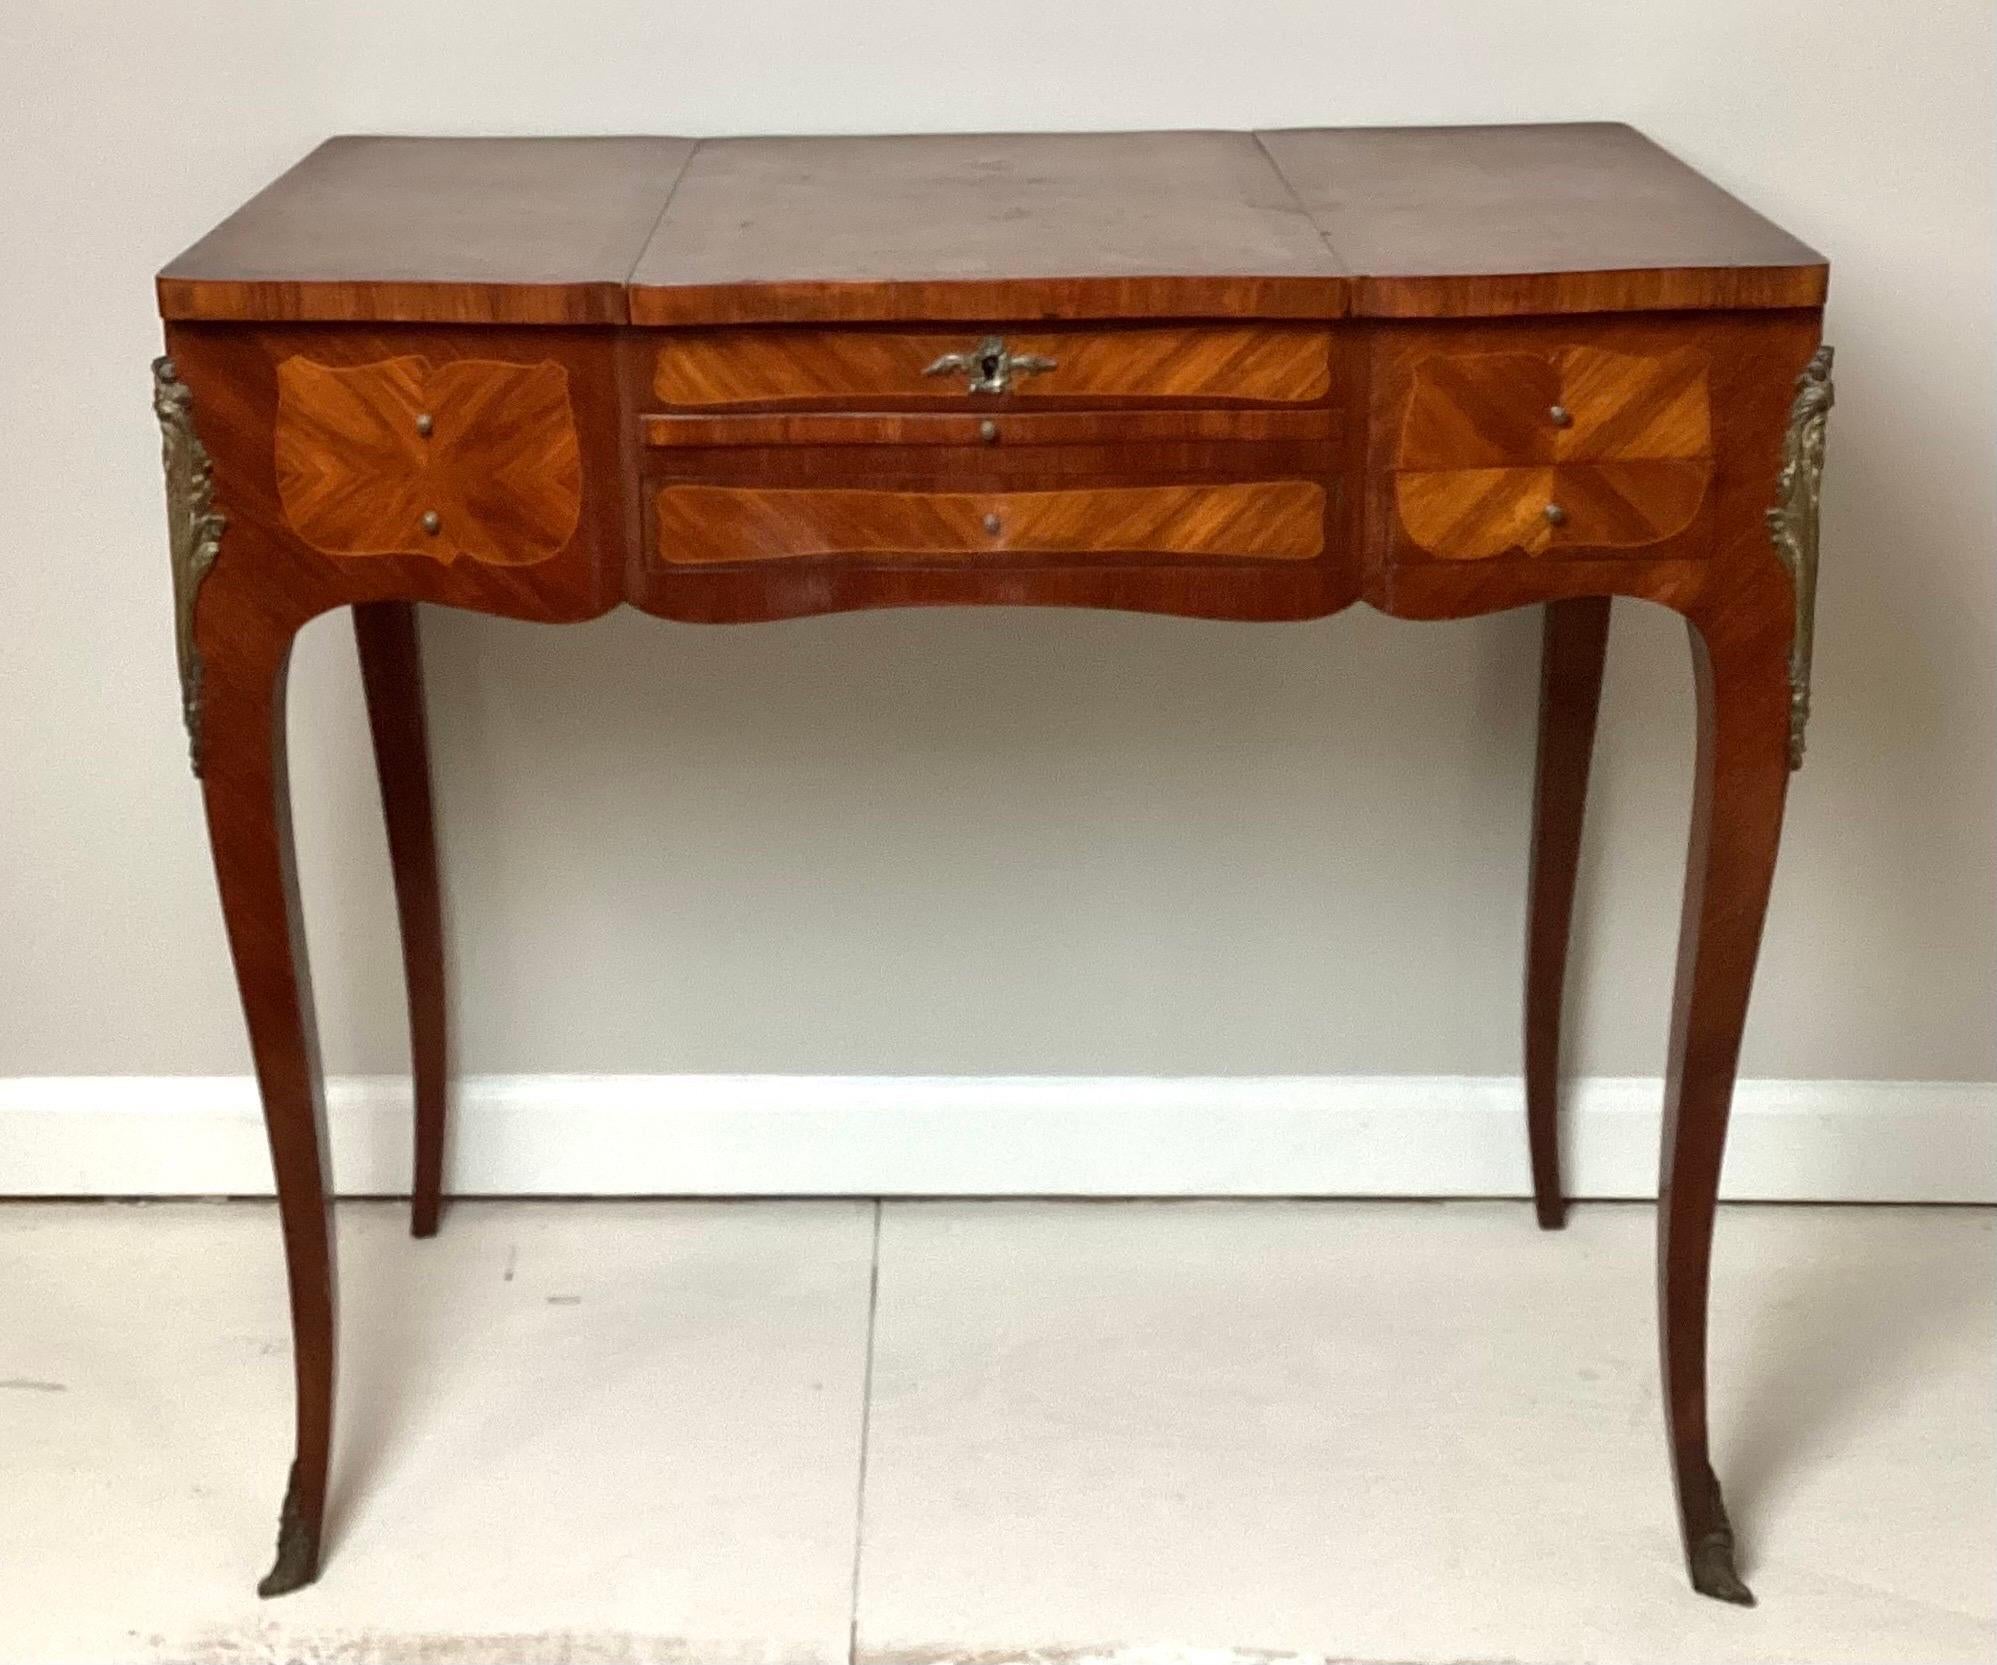 19th century French Marquetry Louis XV dressing table. 33”wide by 19” deep by 30” with mirror open 48” tall. This piece has not been touched in years. Old veneer repair on top and old repair on back. Original used interior. Bronze mounts are